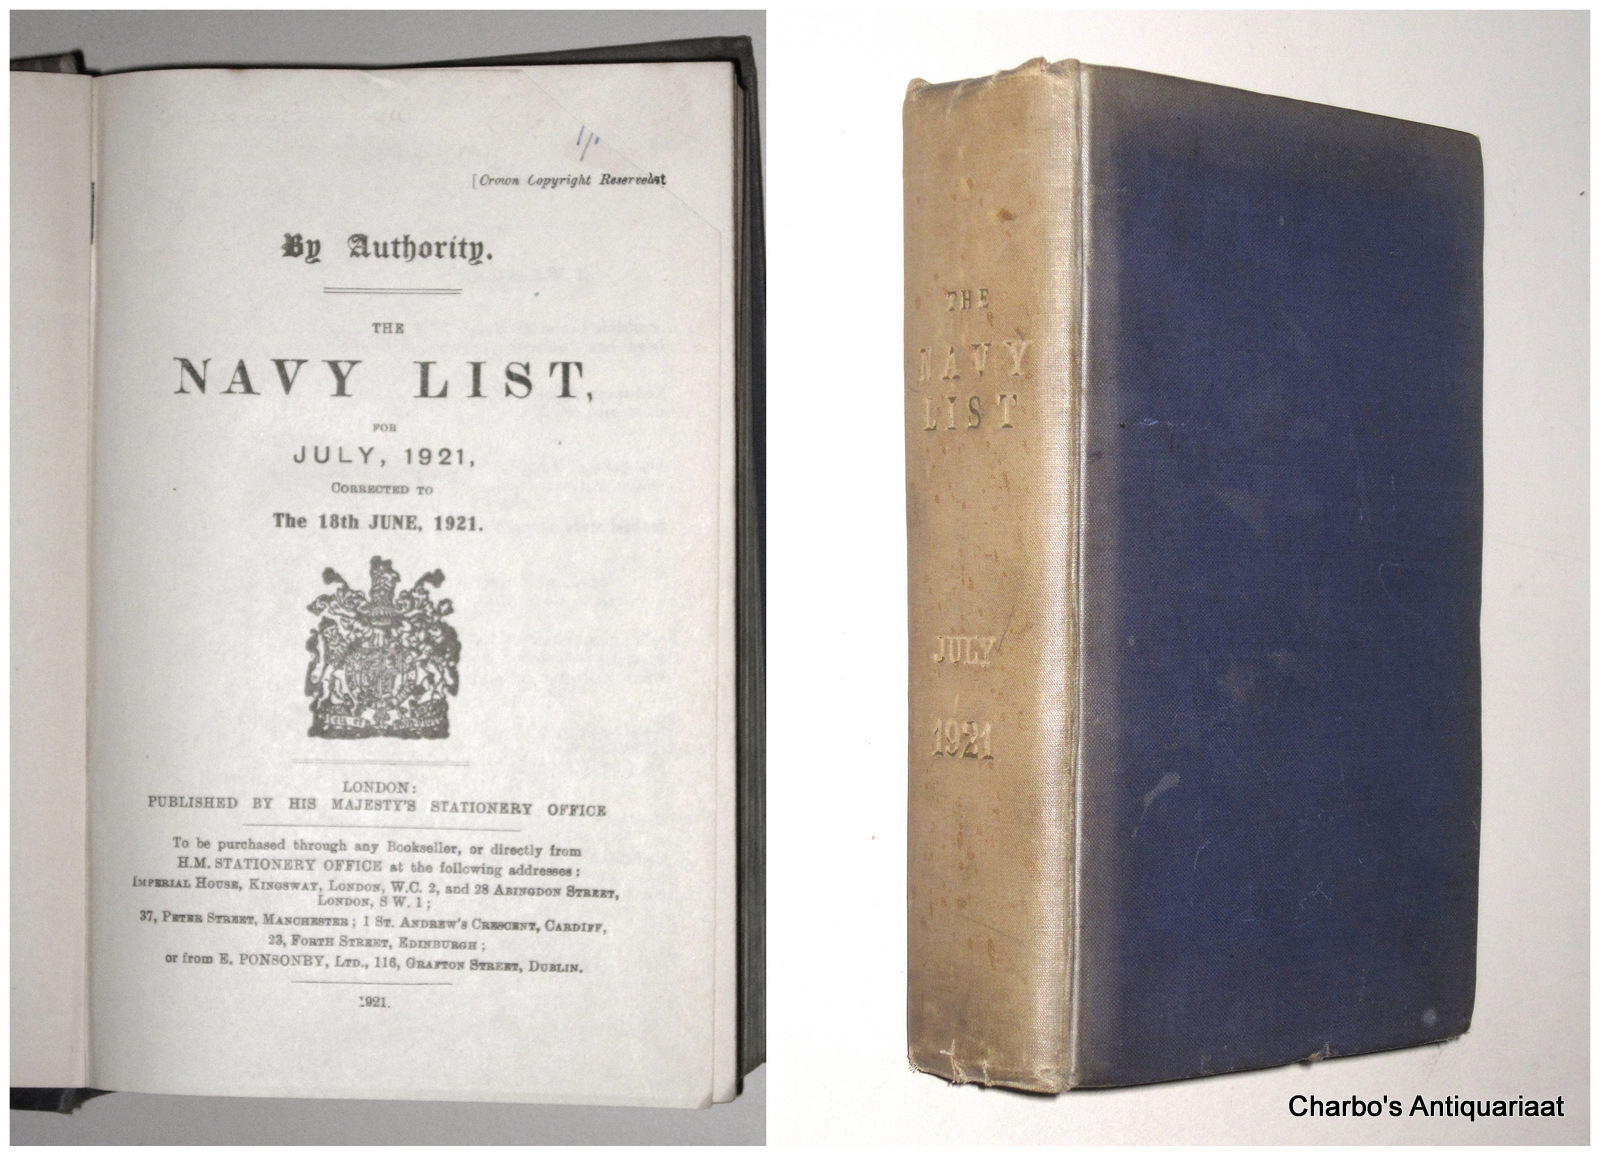 NAVY LIST 1921. -  By authority: The Navy list, for July, 1921, corrected to the 18th June, 1921.